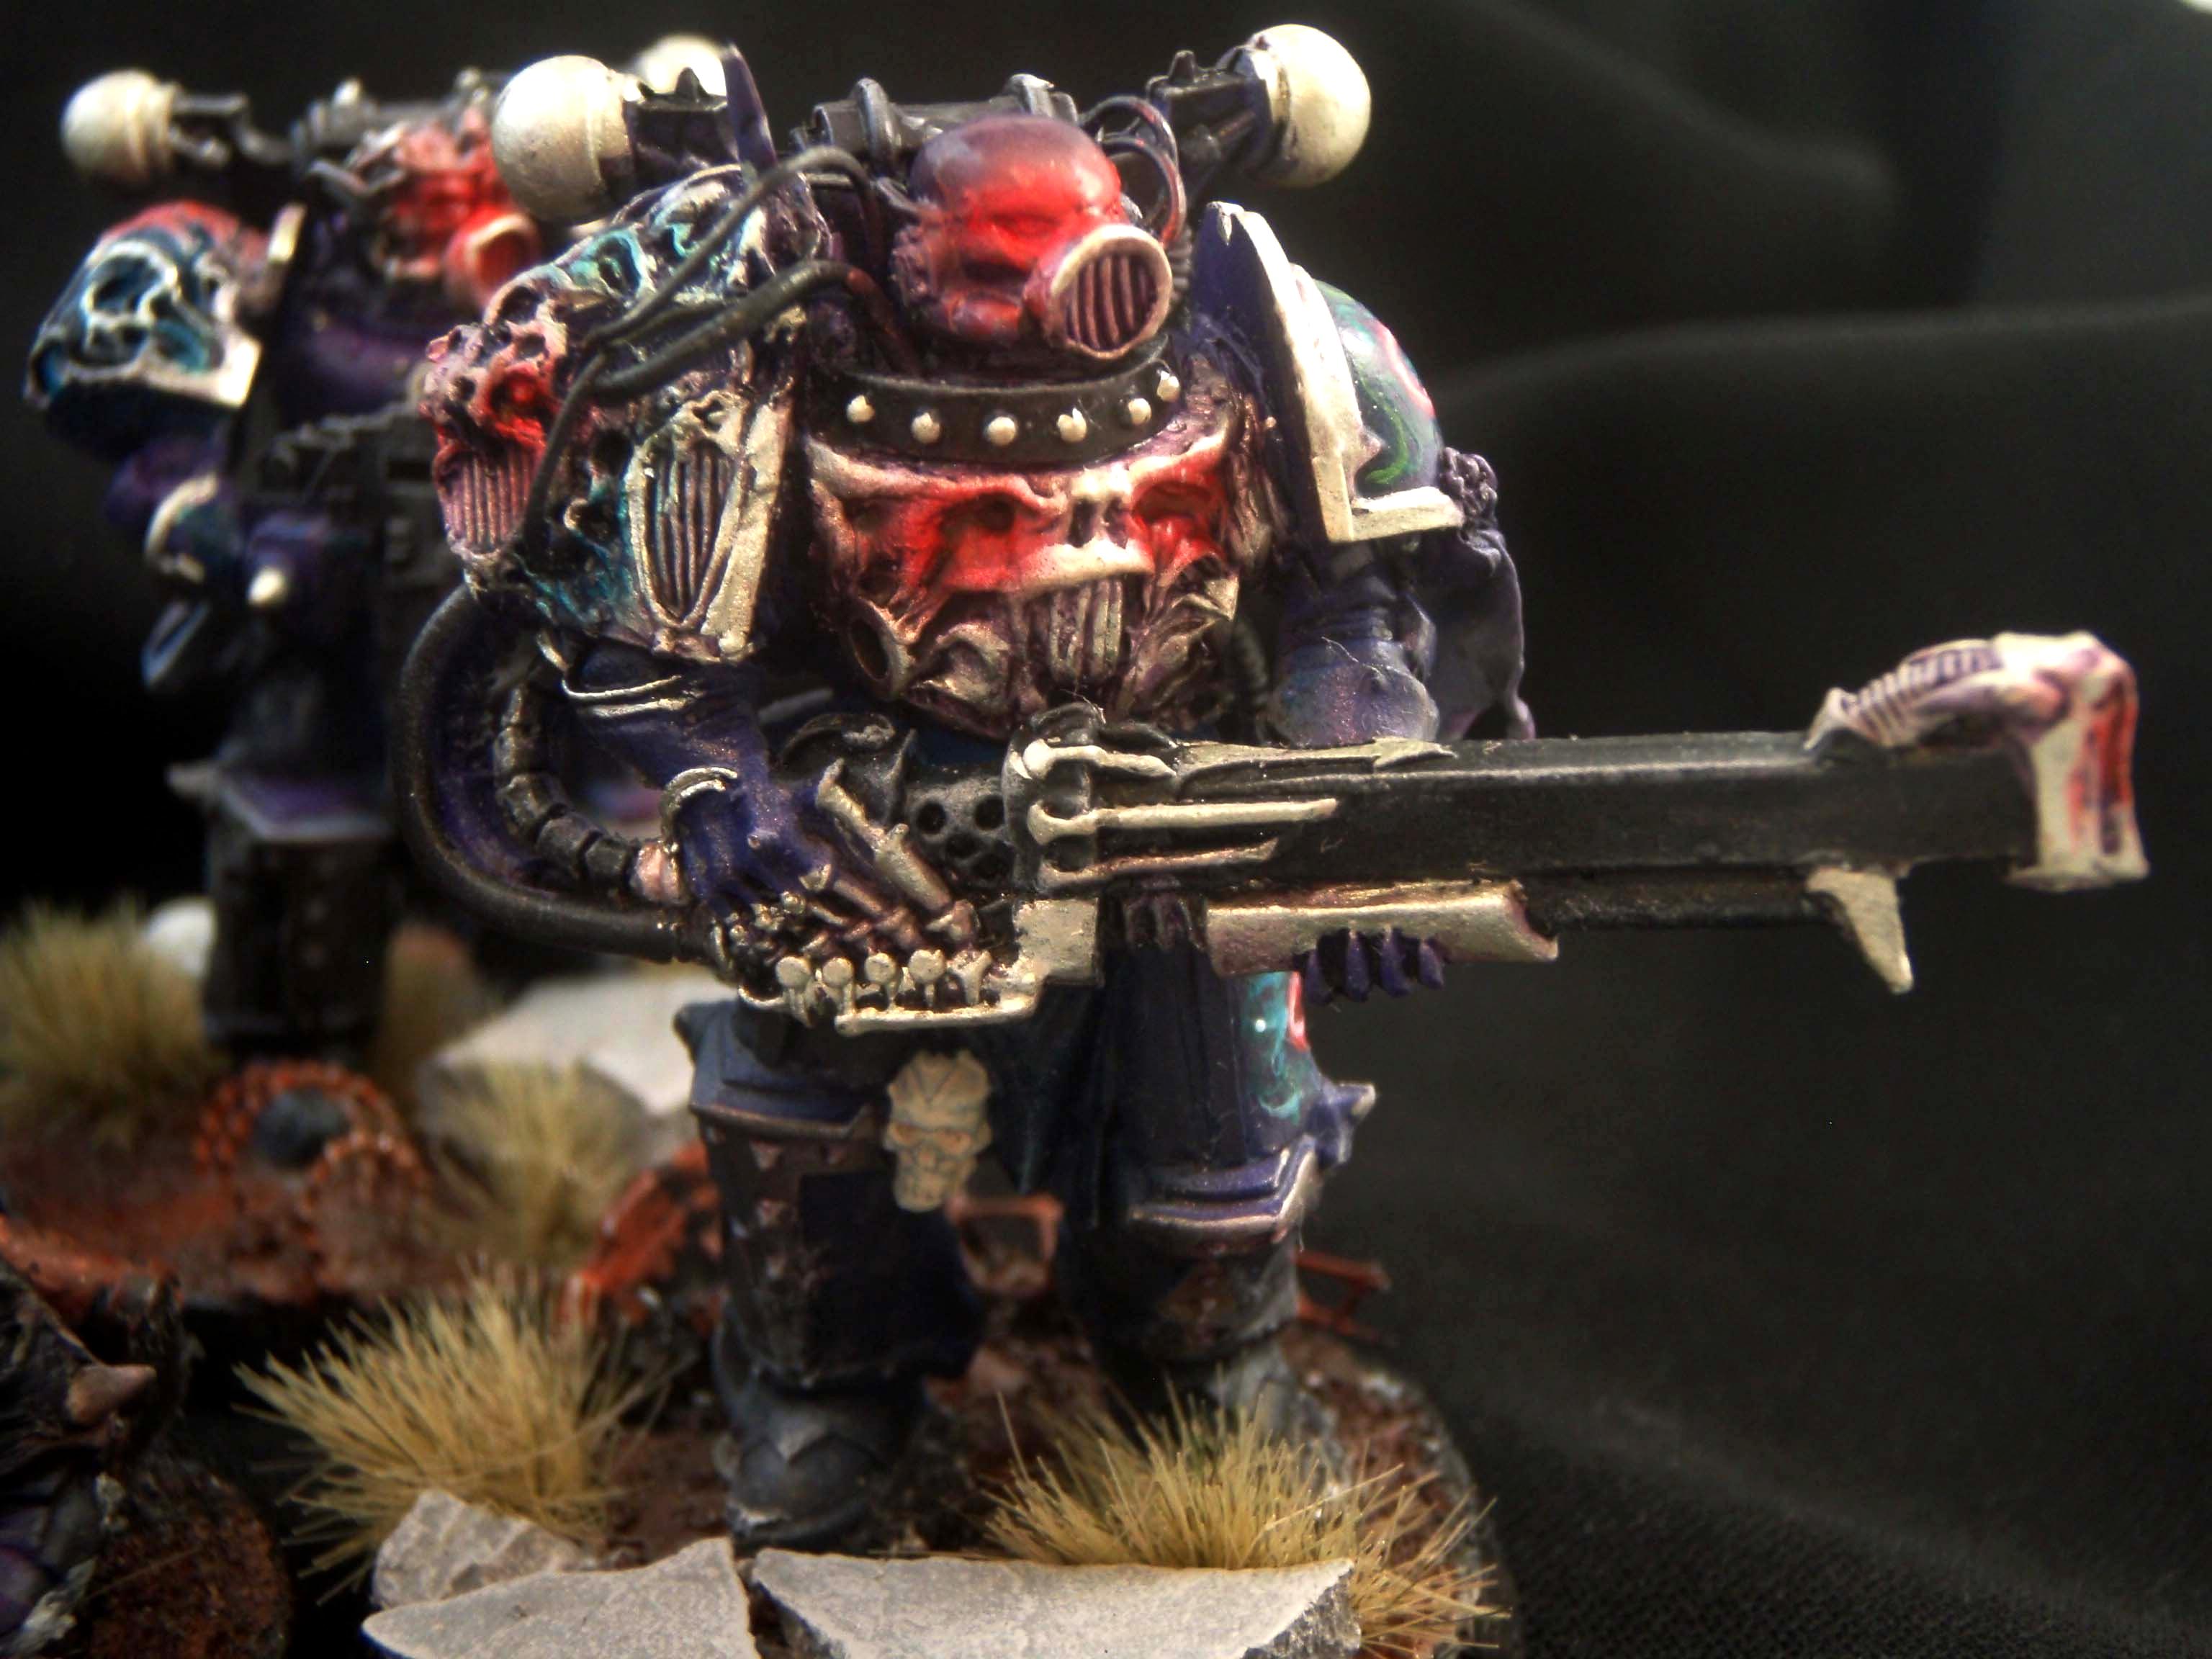 Blastmaster, Chaos, Chaos Space Marines, Glowing, Meade, Noise Marines, Object Source Lighting, Red Eyes, Warhammer 40,000